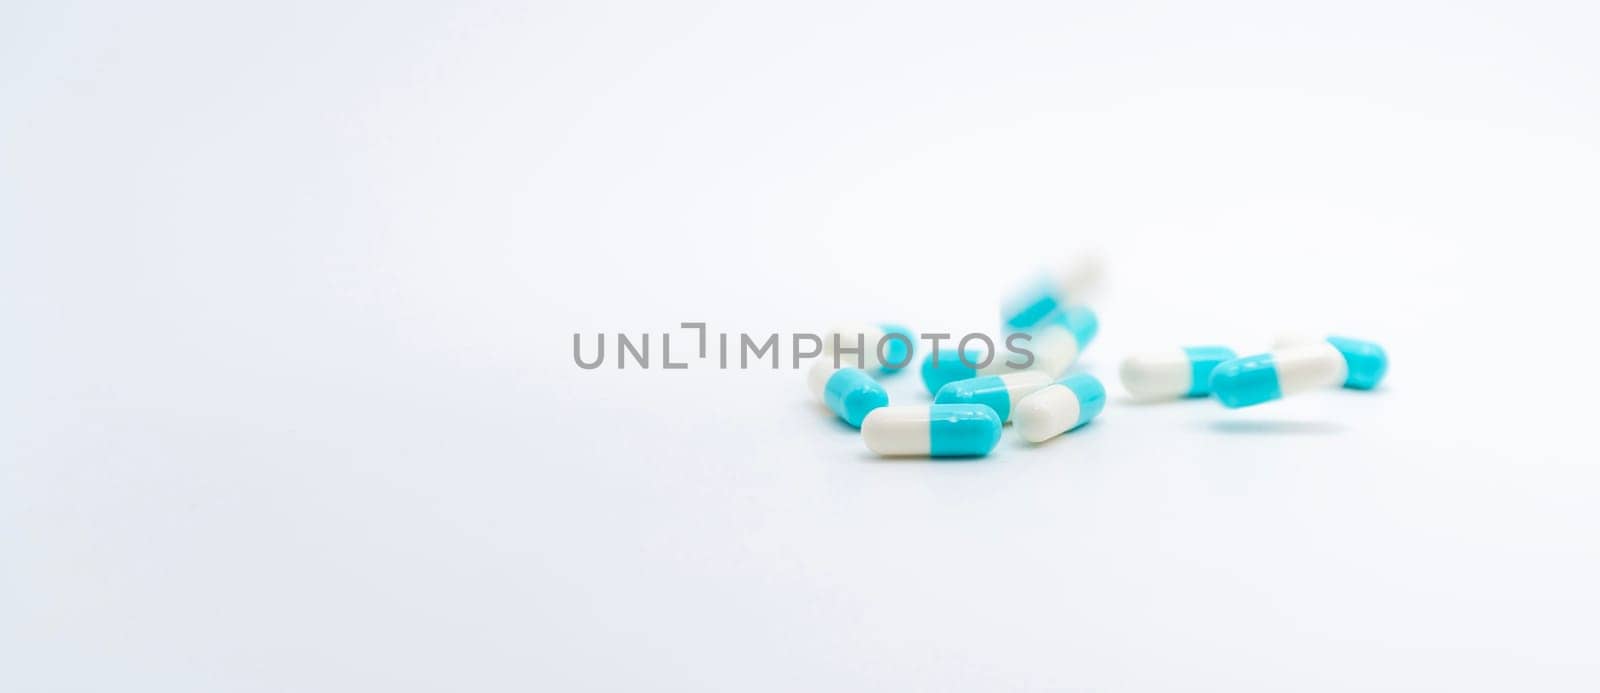 Antibiotic capsules pill falling on white background. Pharmacy banner. Antibiotic drug resistance. Prescription medicine. Medical healthcare concept. Pharmaceutical industry. Blue-white capsule pill. by Fahroni